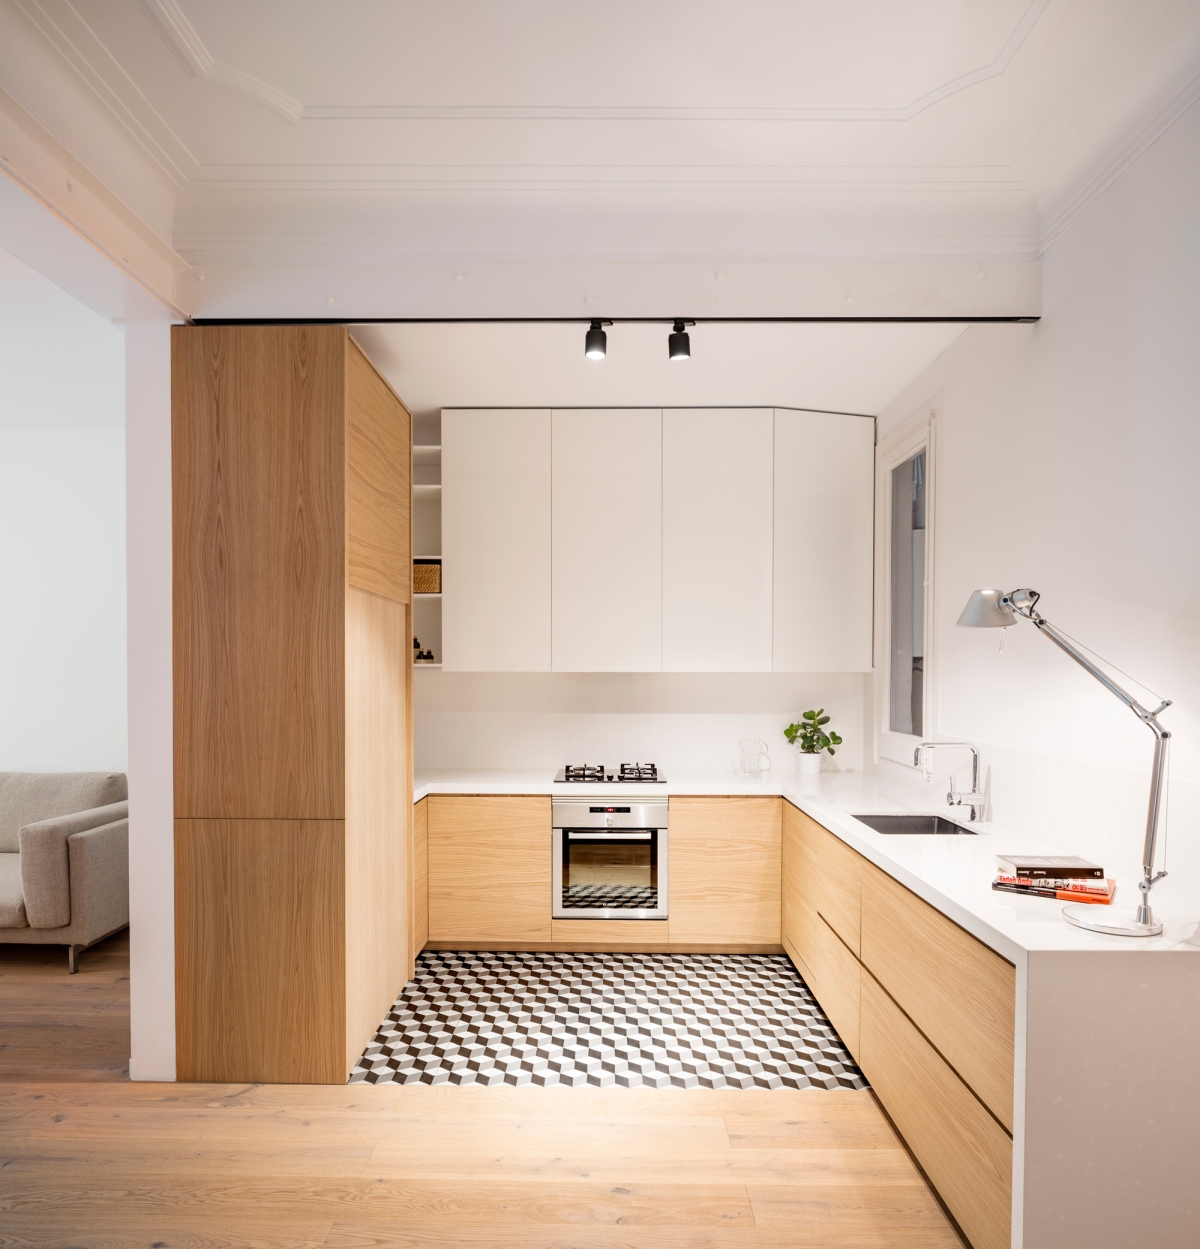 How to design a functional kitchen: EO arquitectura - Alan's Apartment Renovation